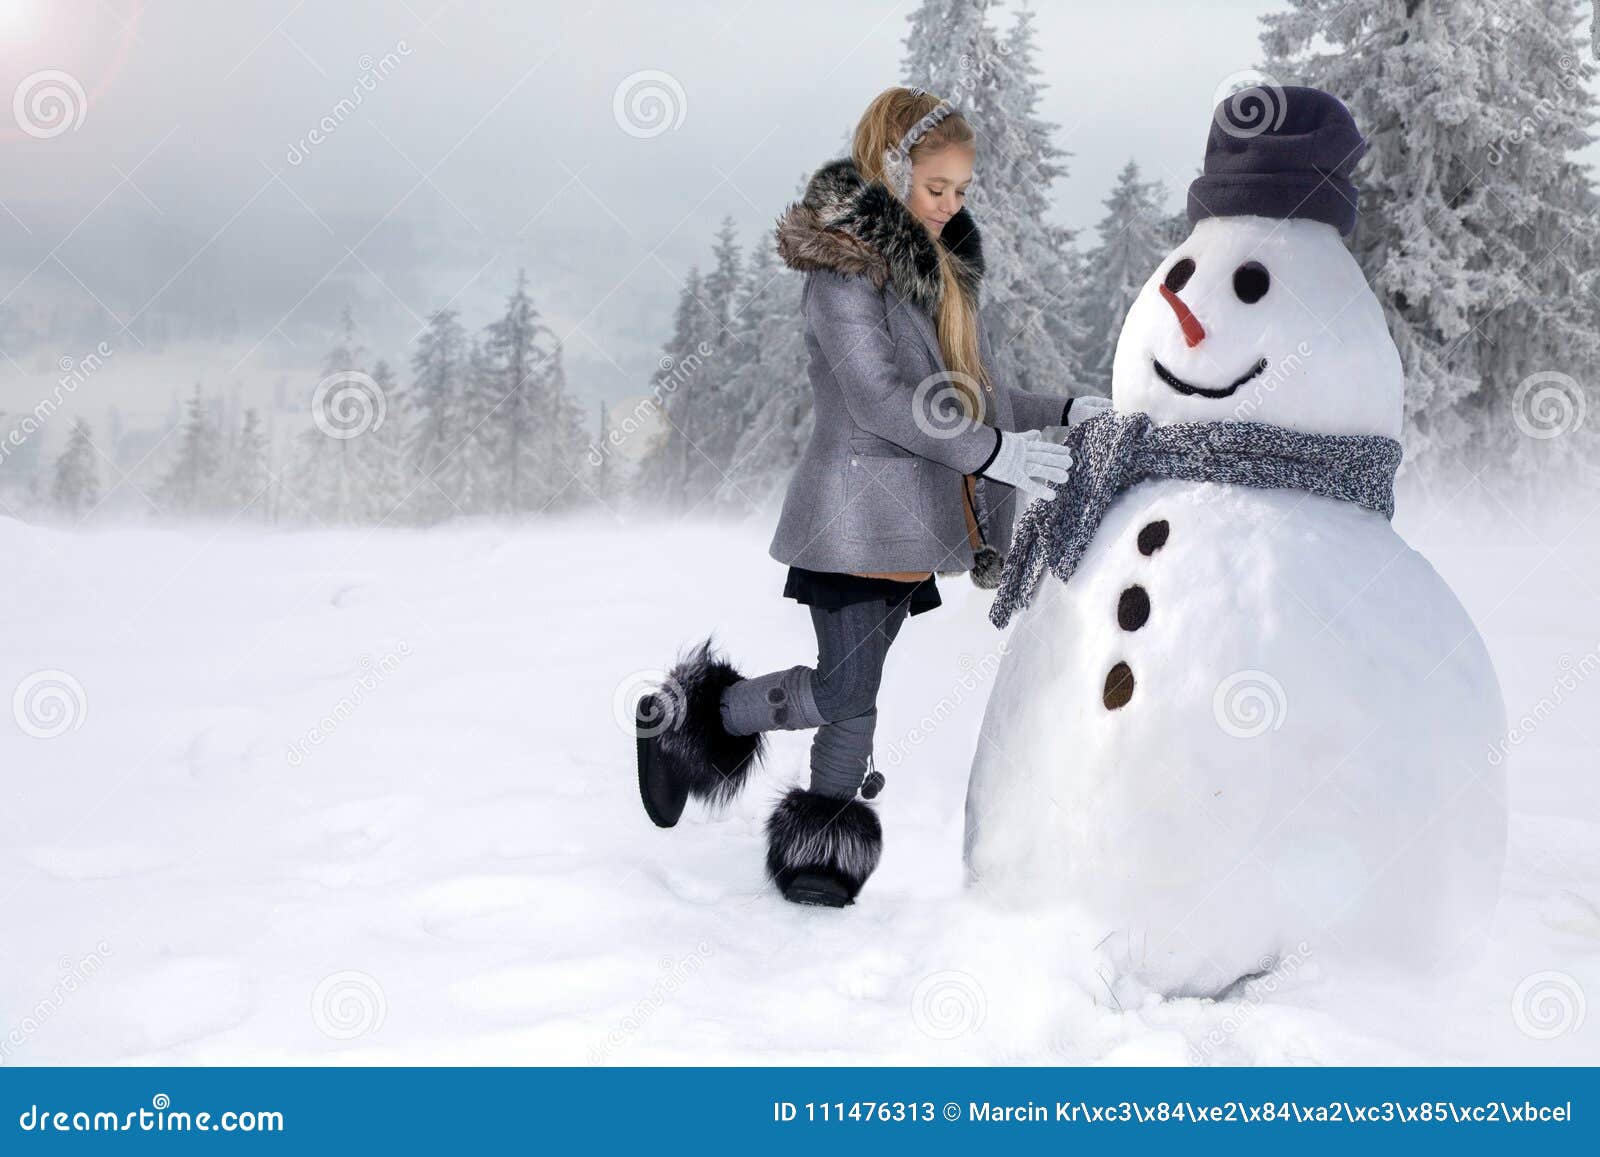 Cute Little Girl, Standing on the Snow and Makes a Snowman with